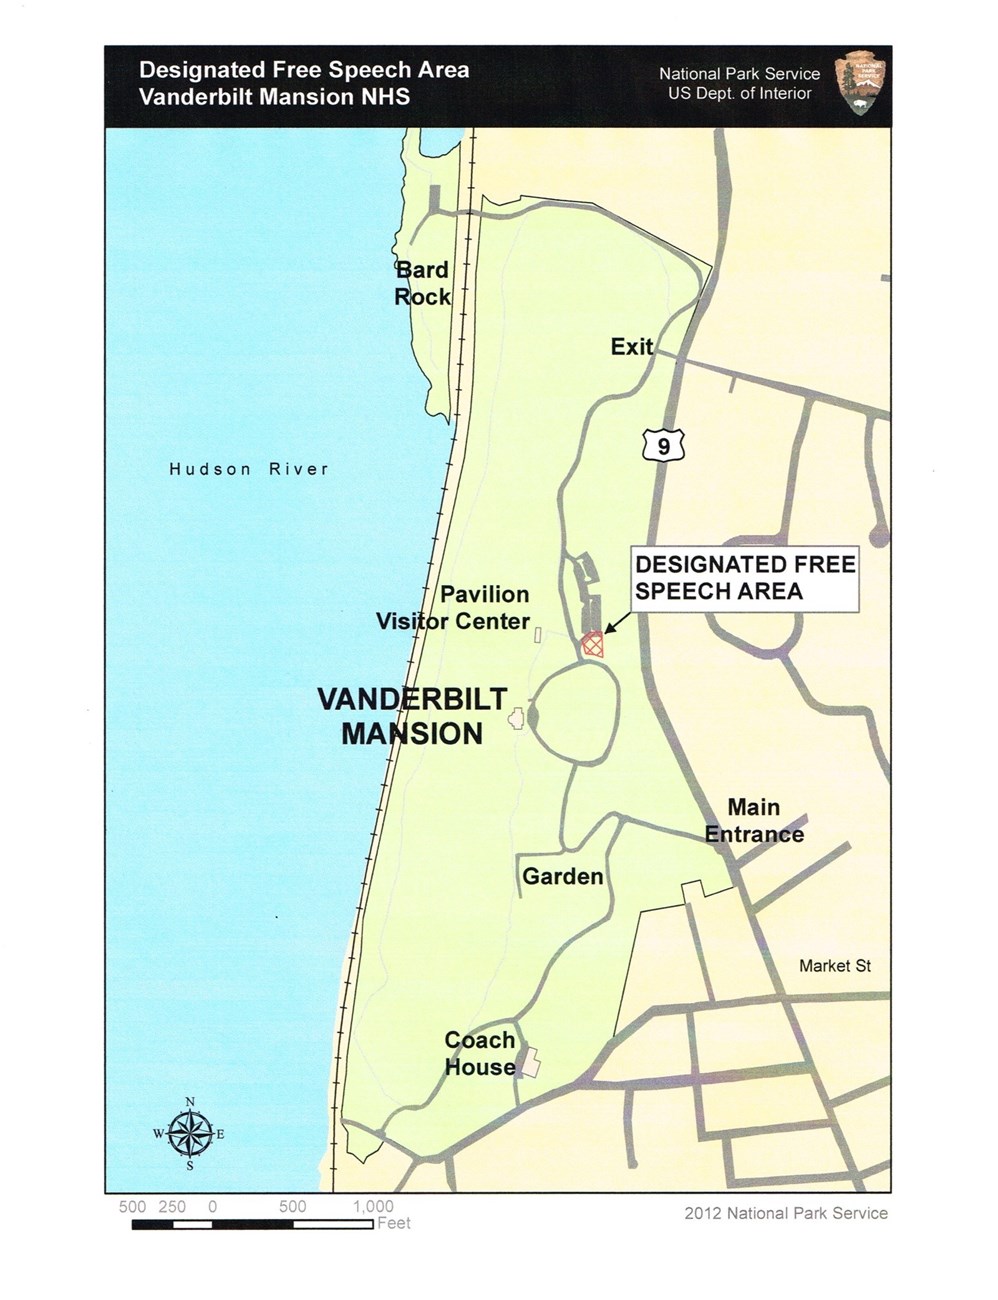 A map showing the designated free speech area for Vanderbilt Mansion